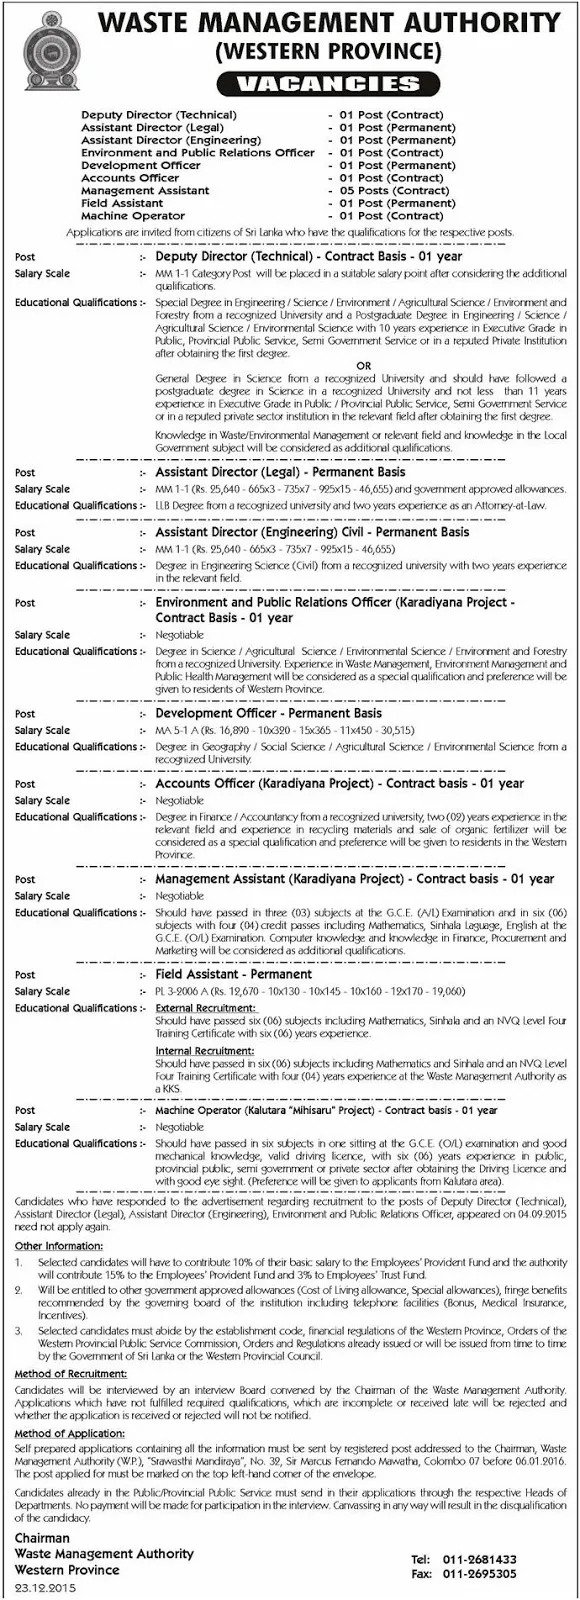 Vacancies of Waste Management Authority